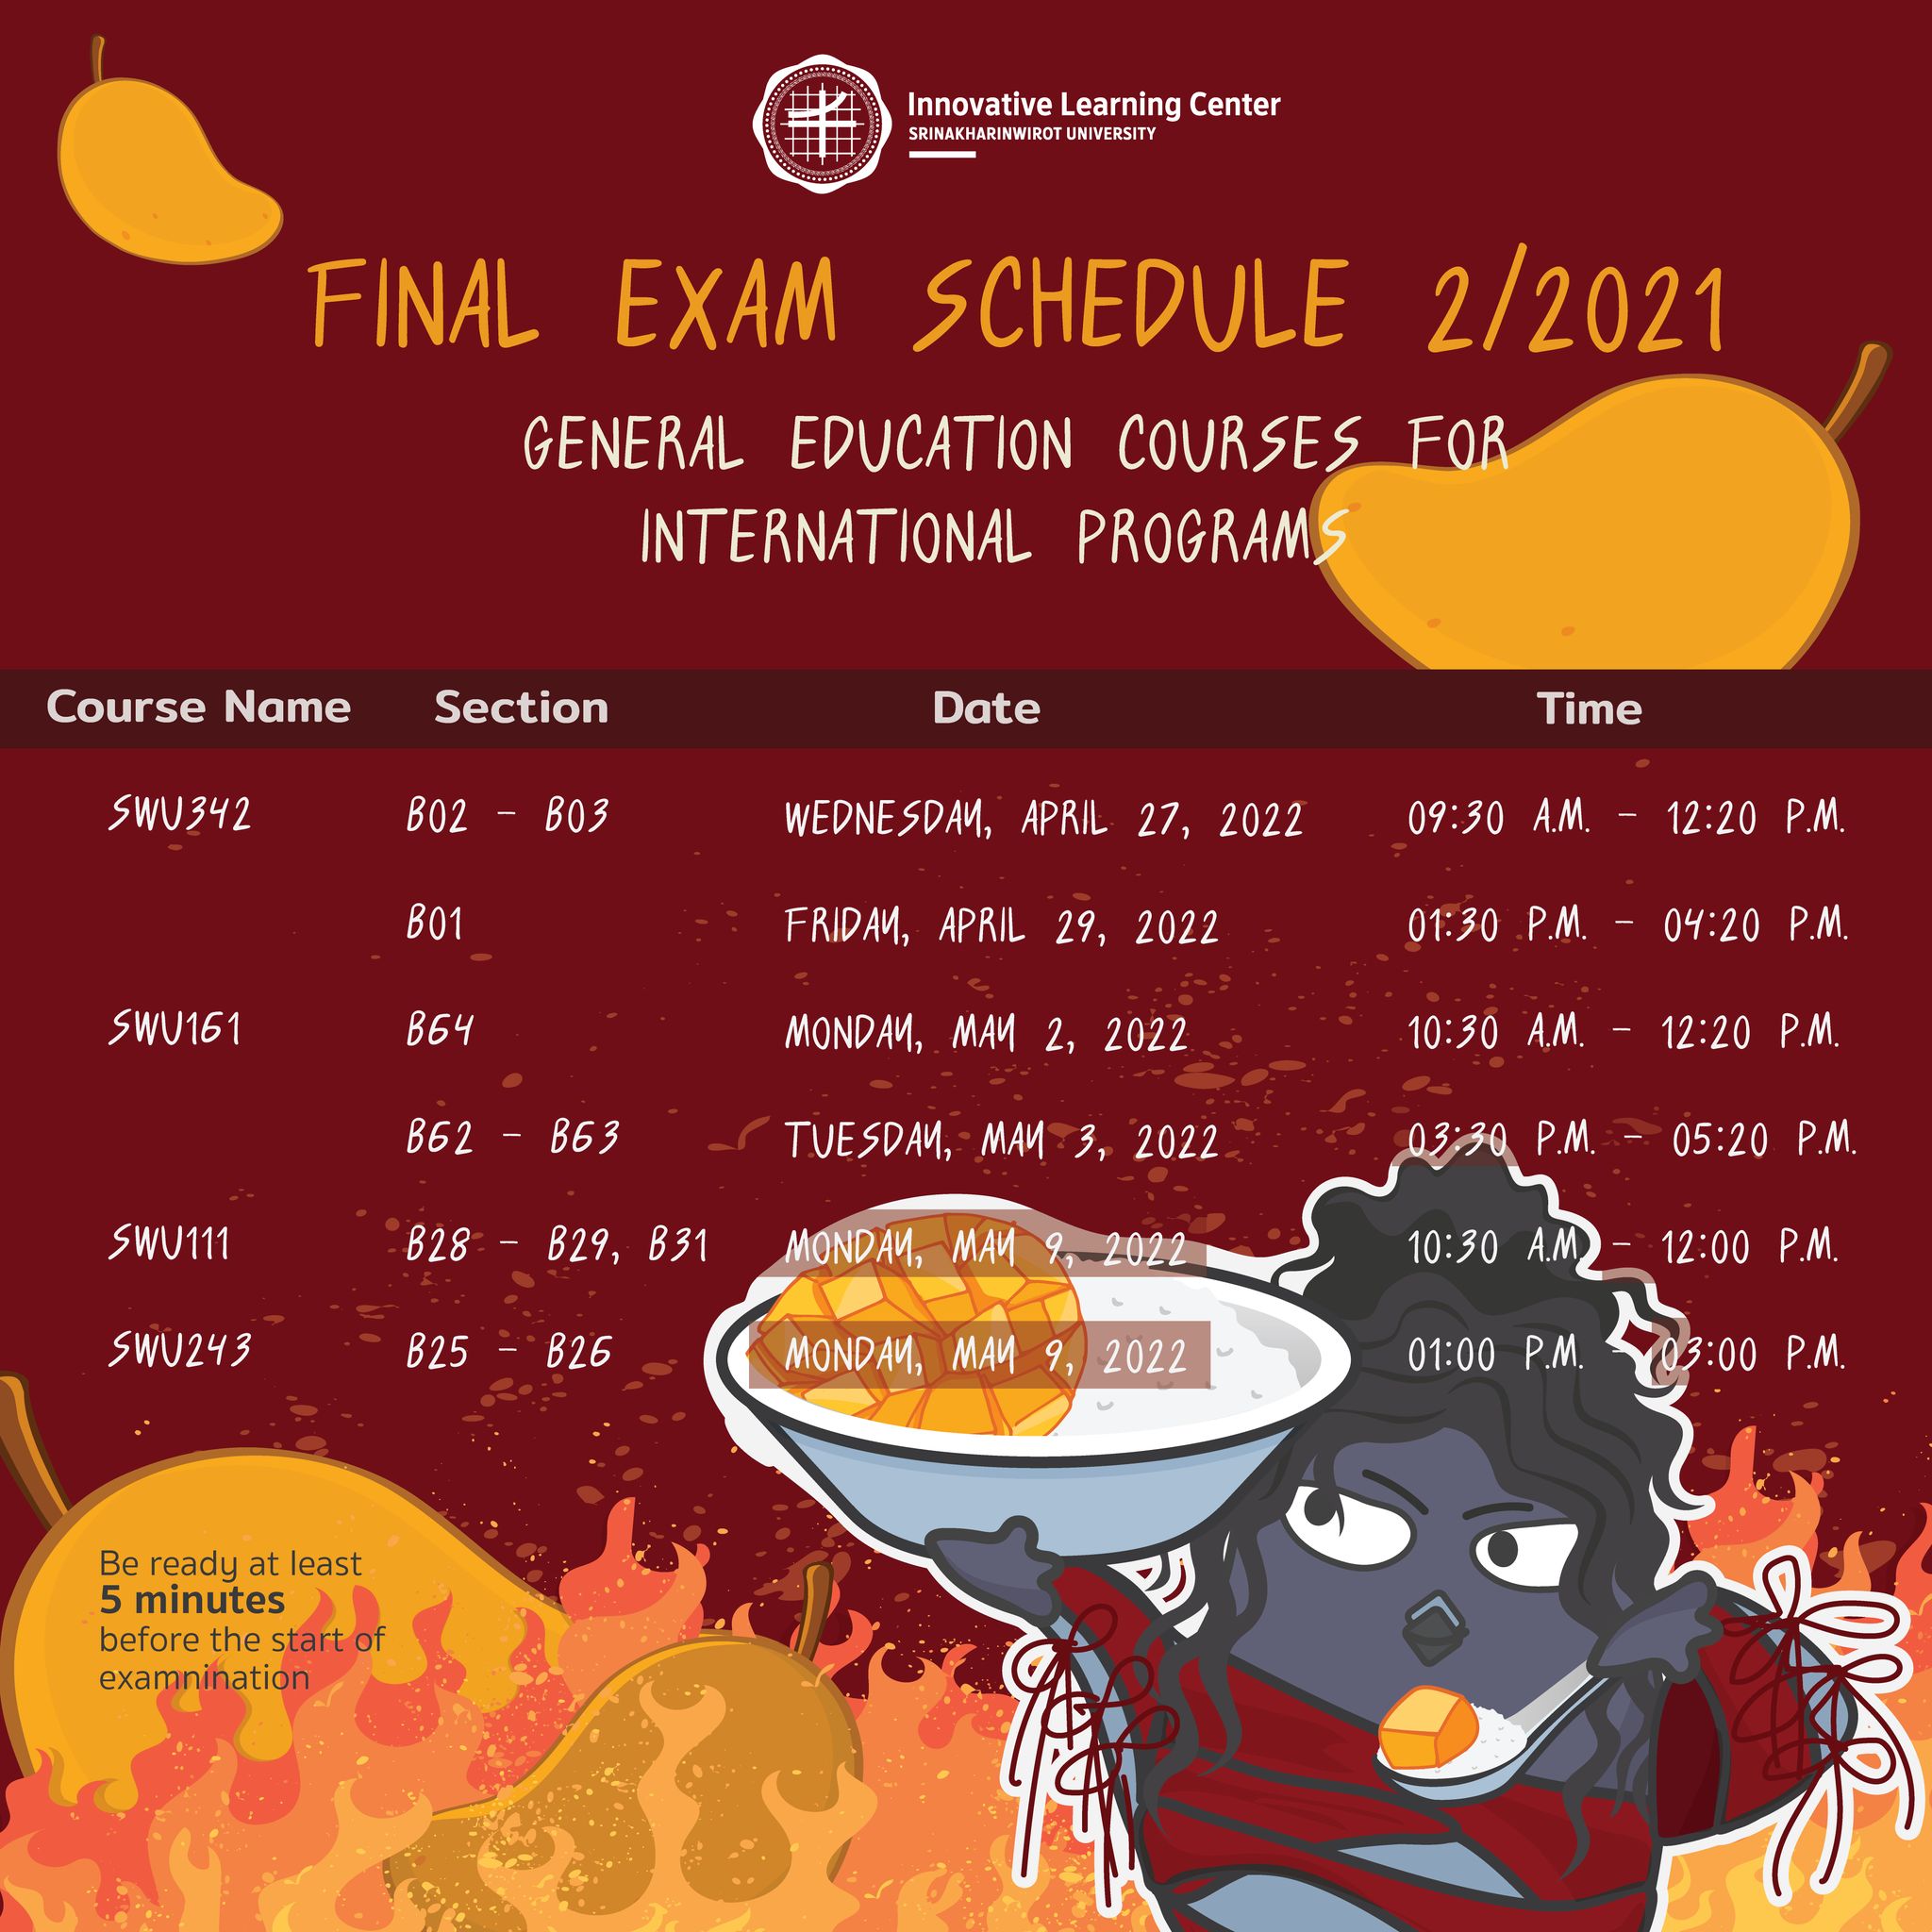 Final Exam Schedule 2/2021 General Education Courses for International